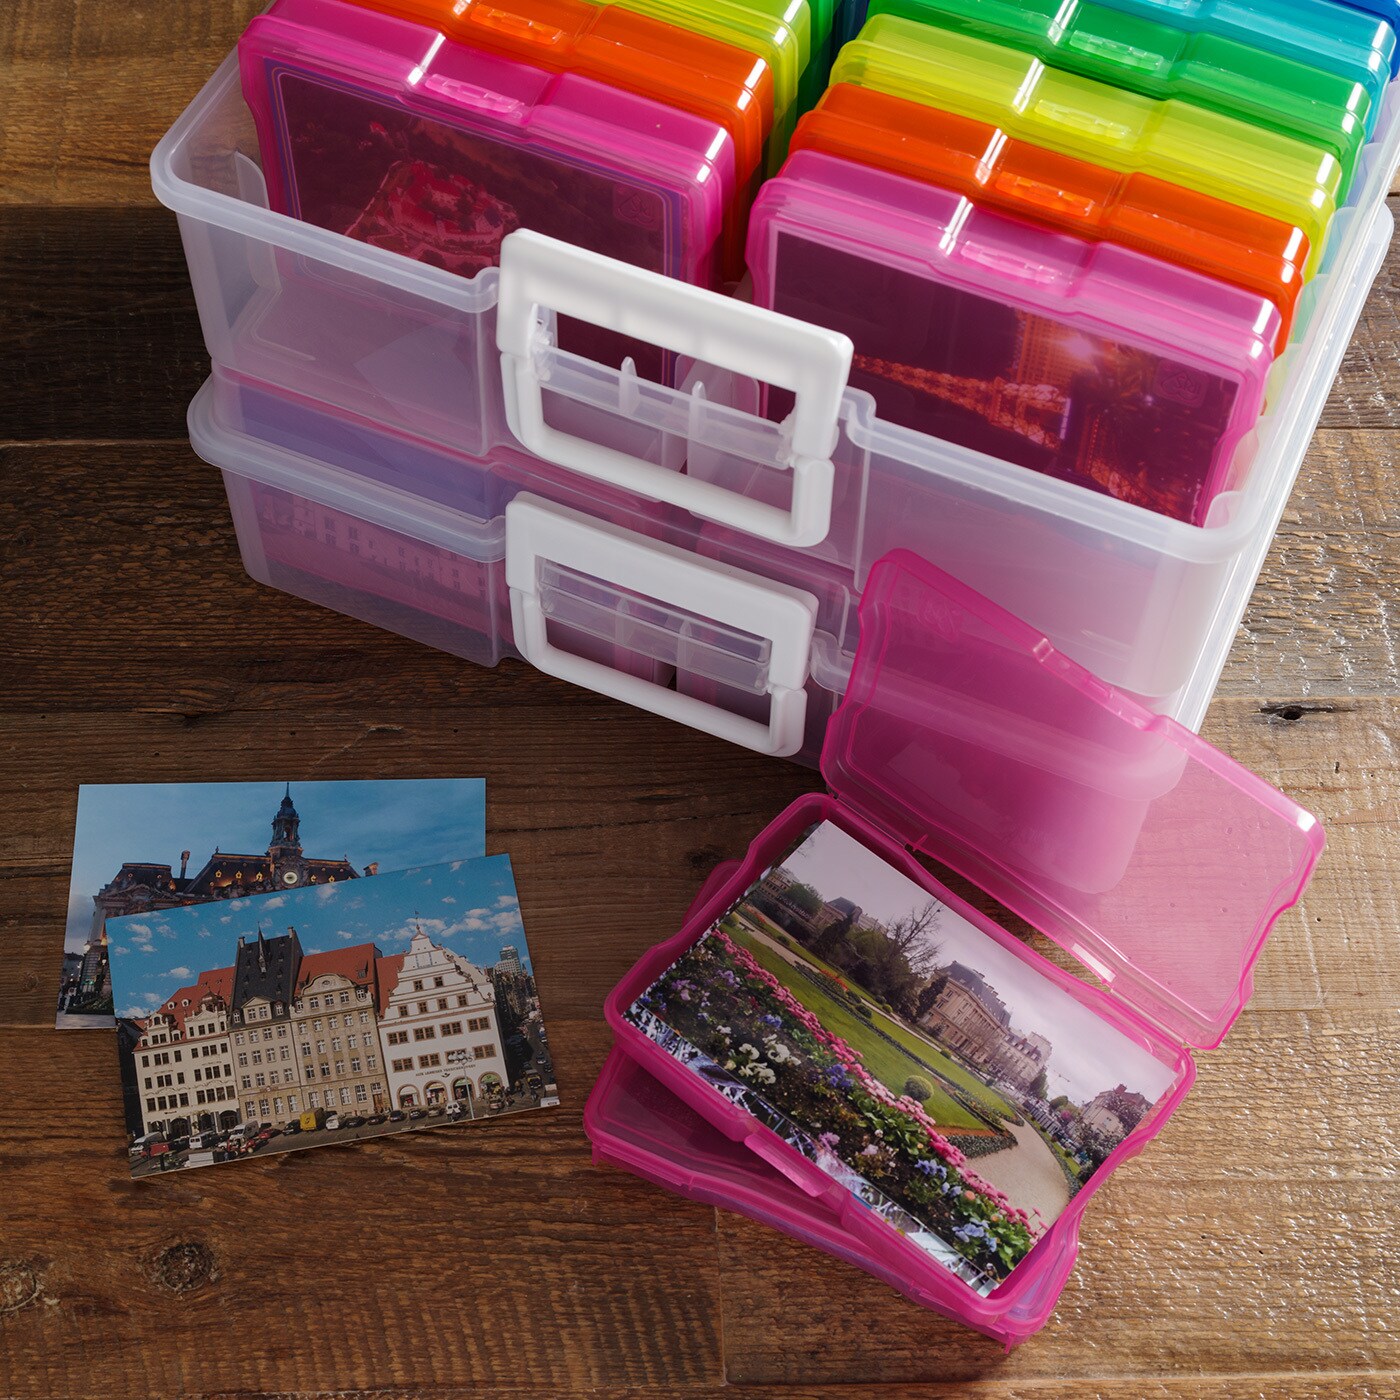 16-Case Photo & Craft Keeper Only $12.59 on Michaels.com + Free